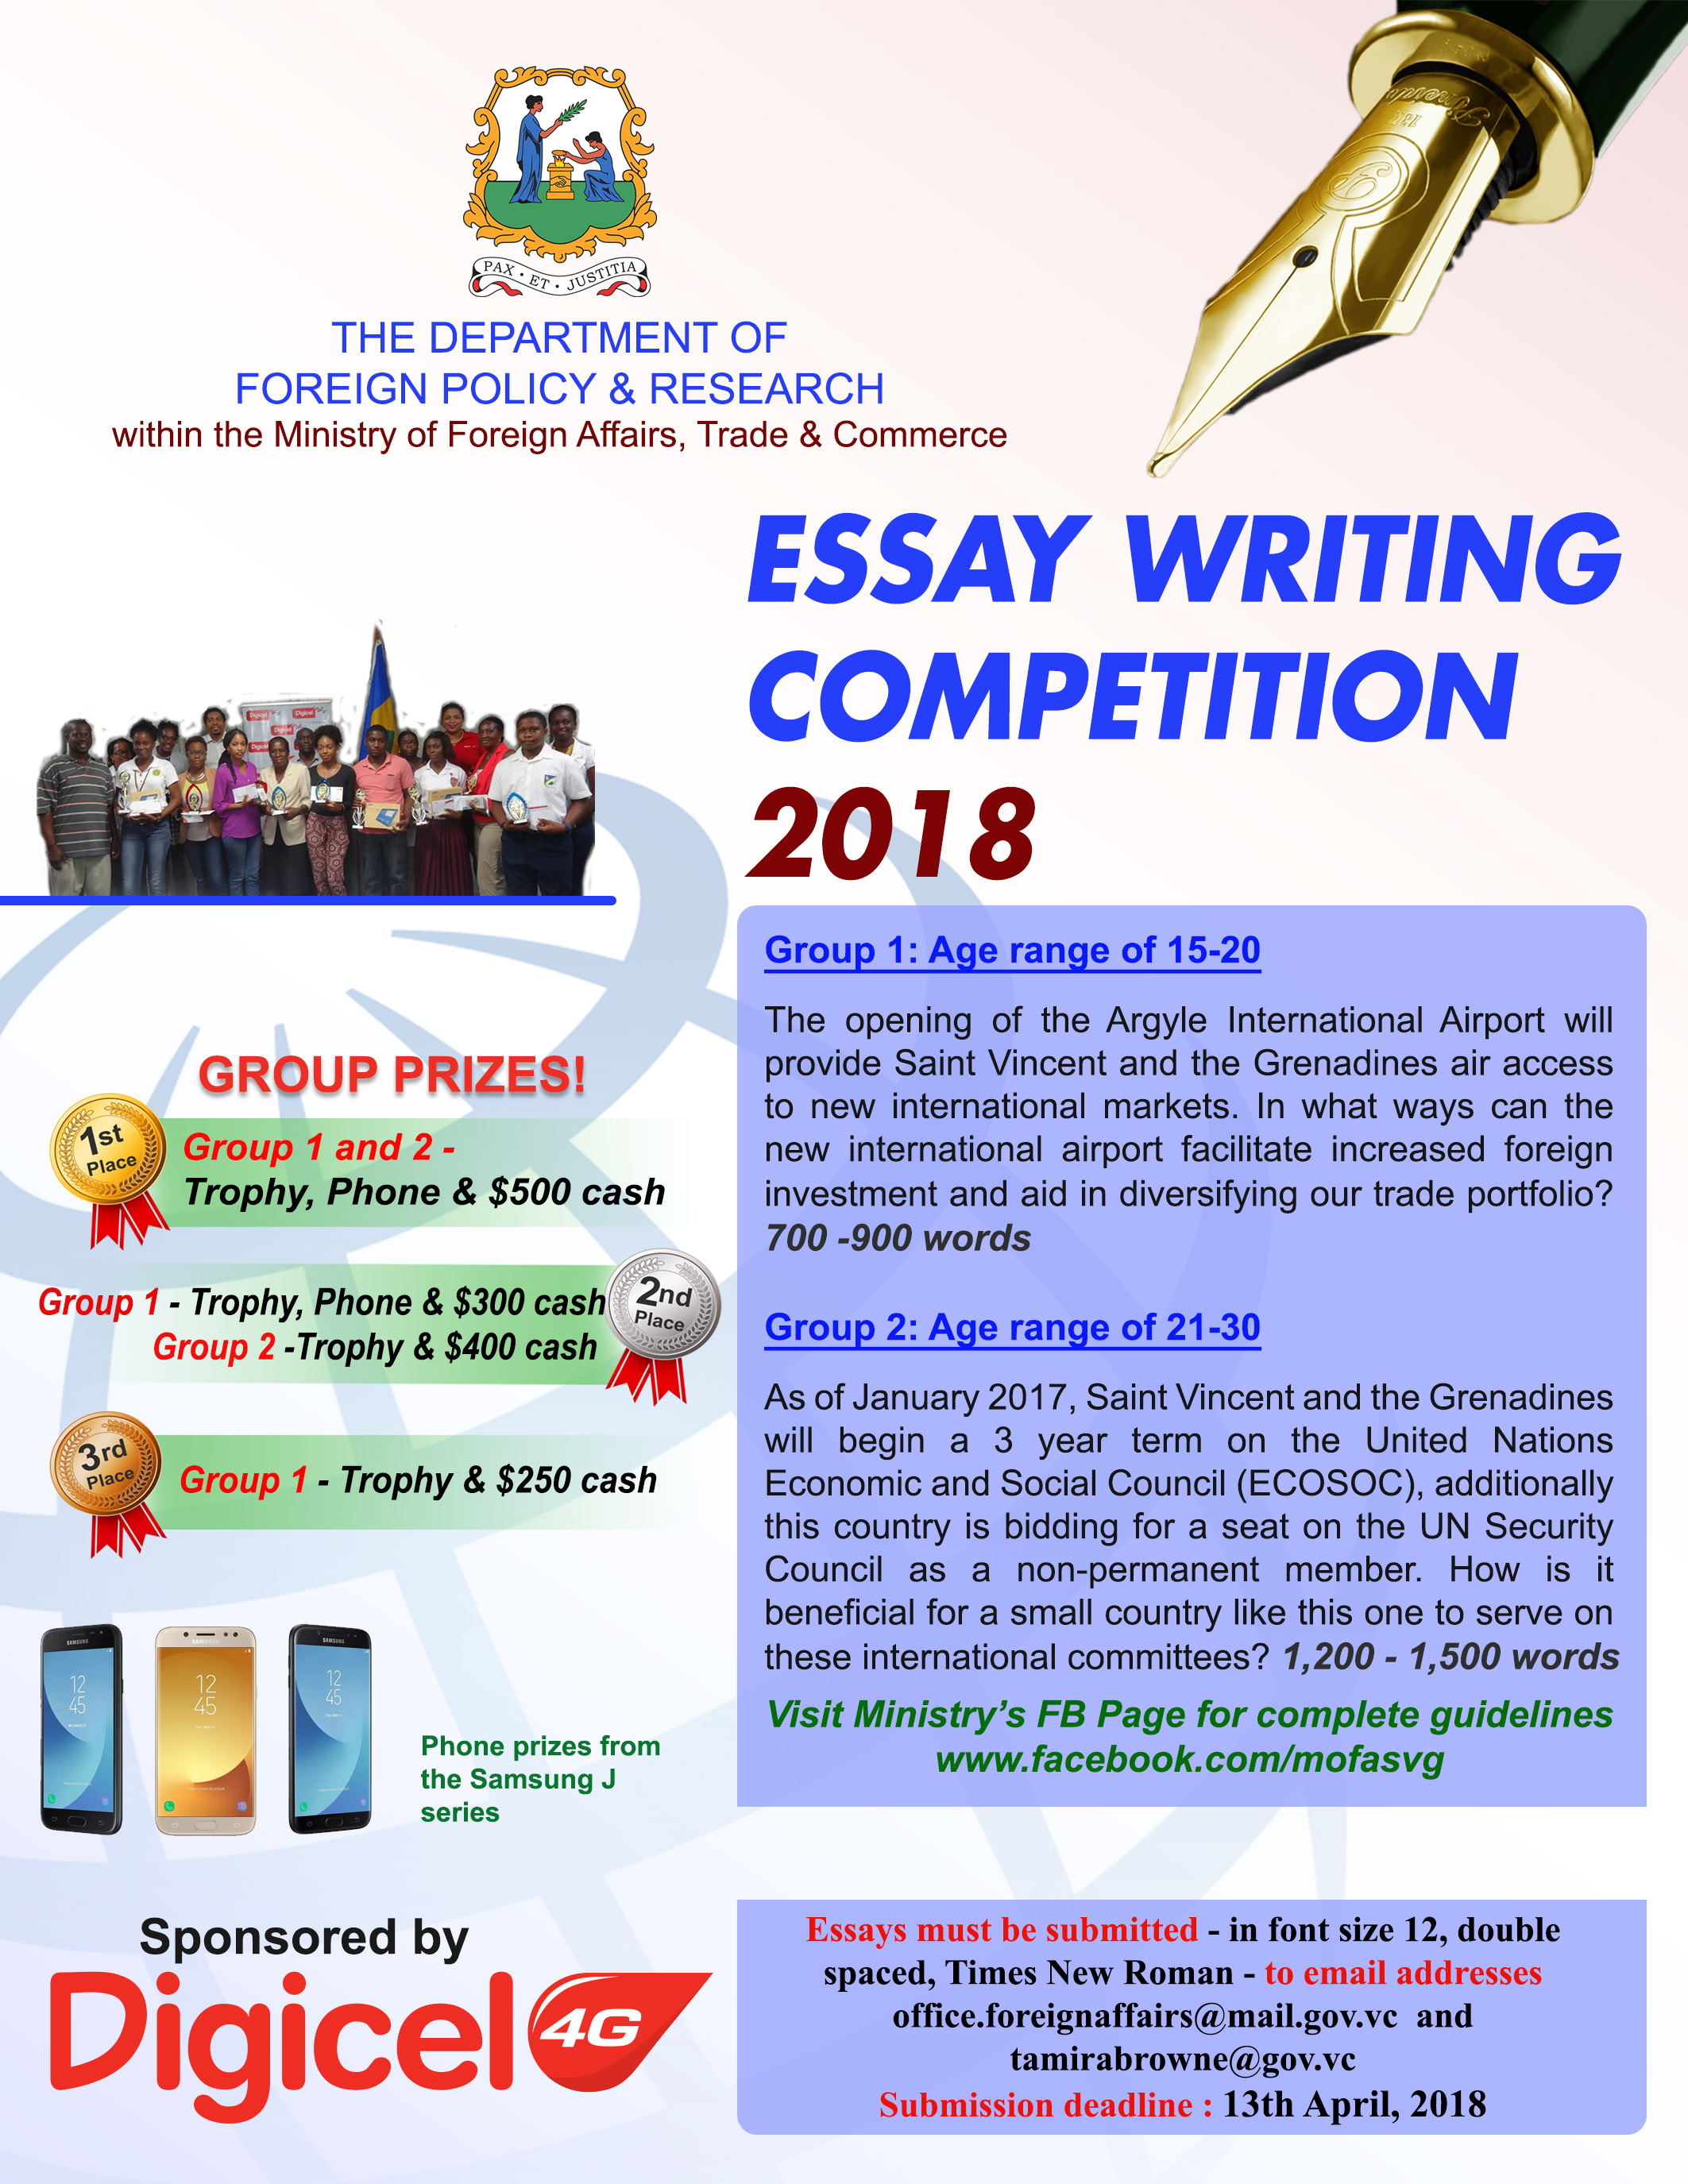 Cascade policy institute independence essay competition